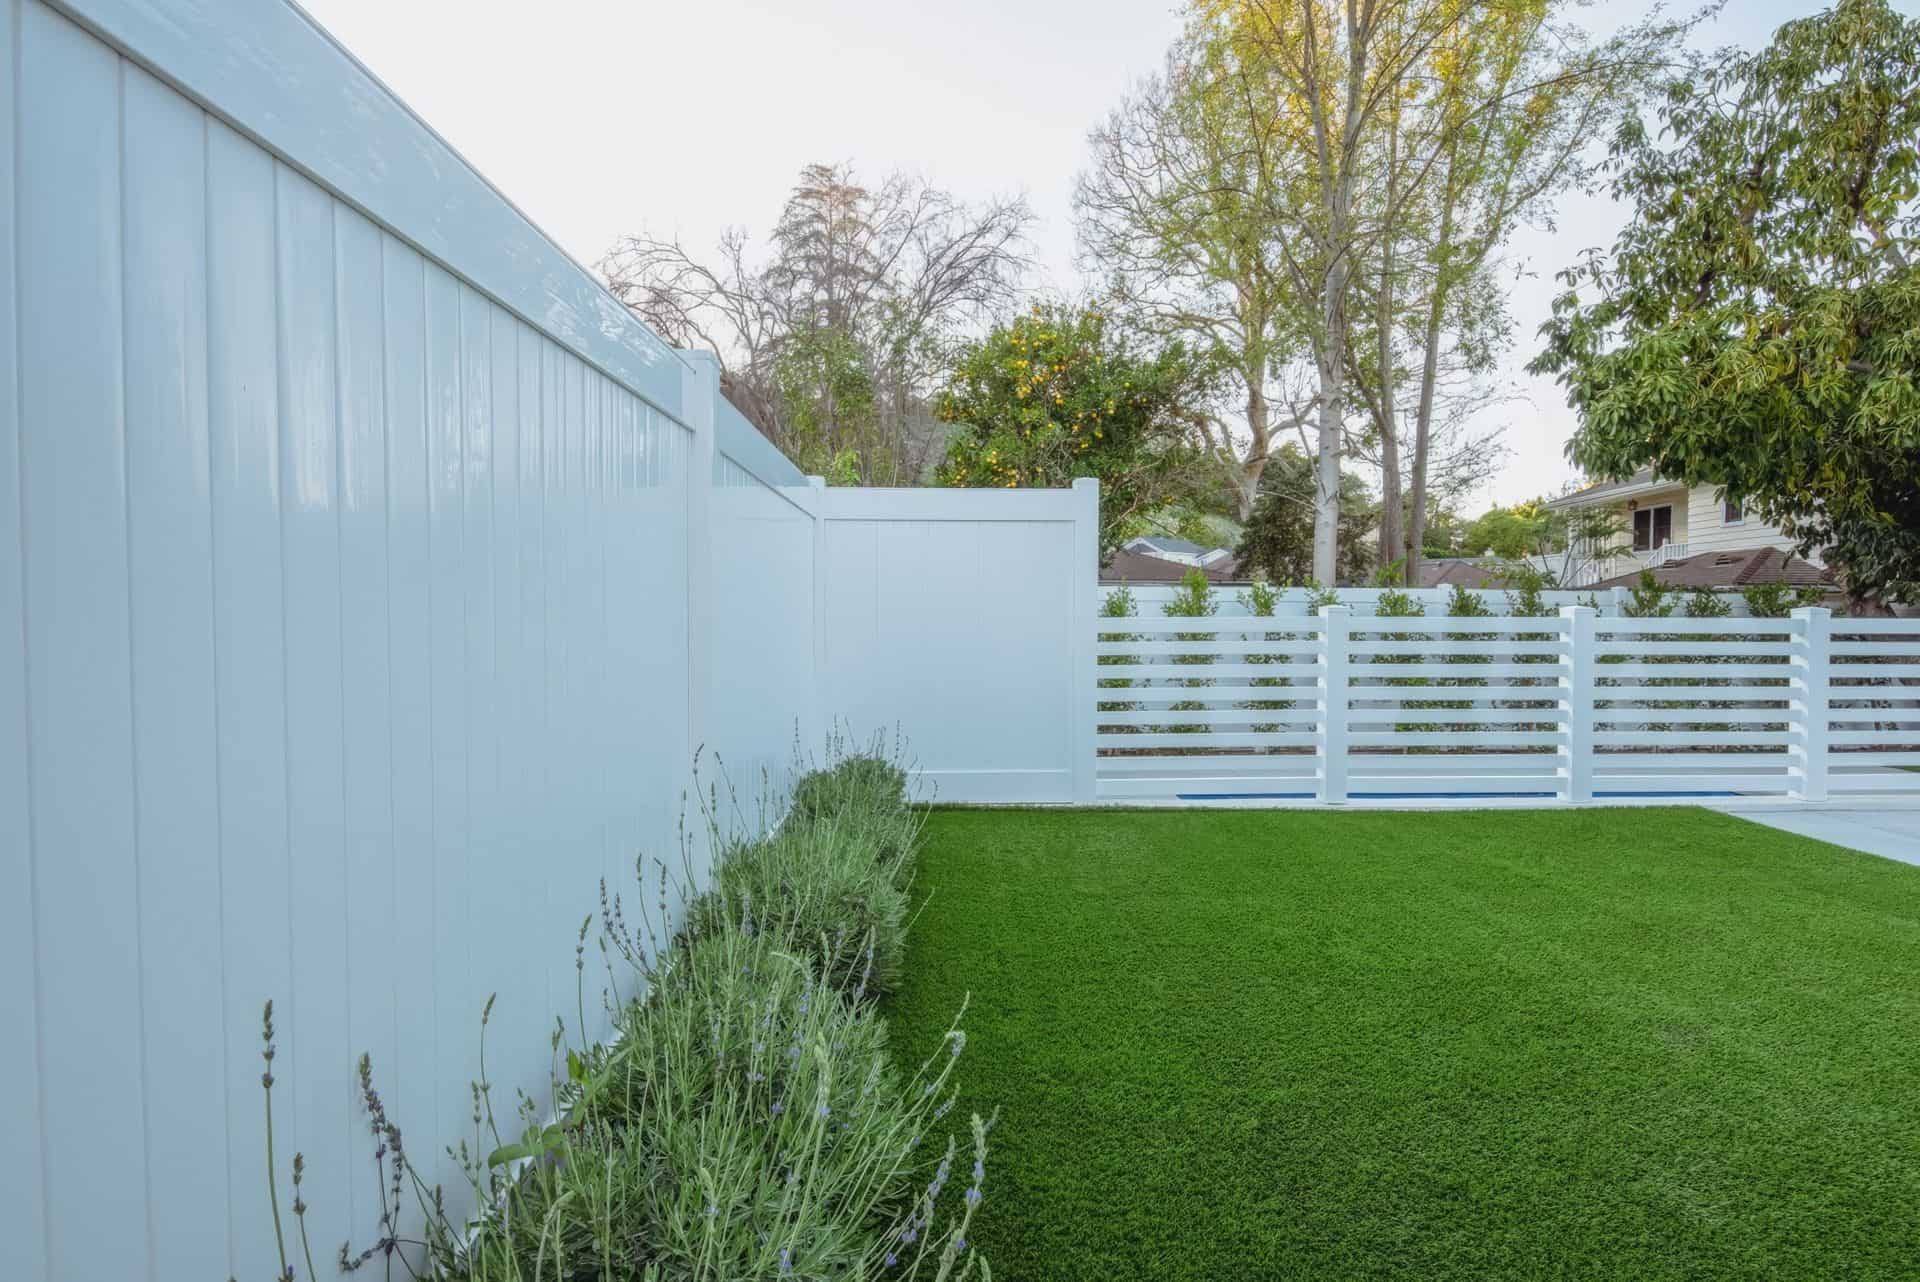 Vinyl privacy vertical fence creating boundary wall and connecting to slatted short fence separating small garden and lawn